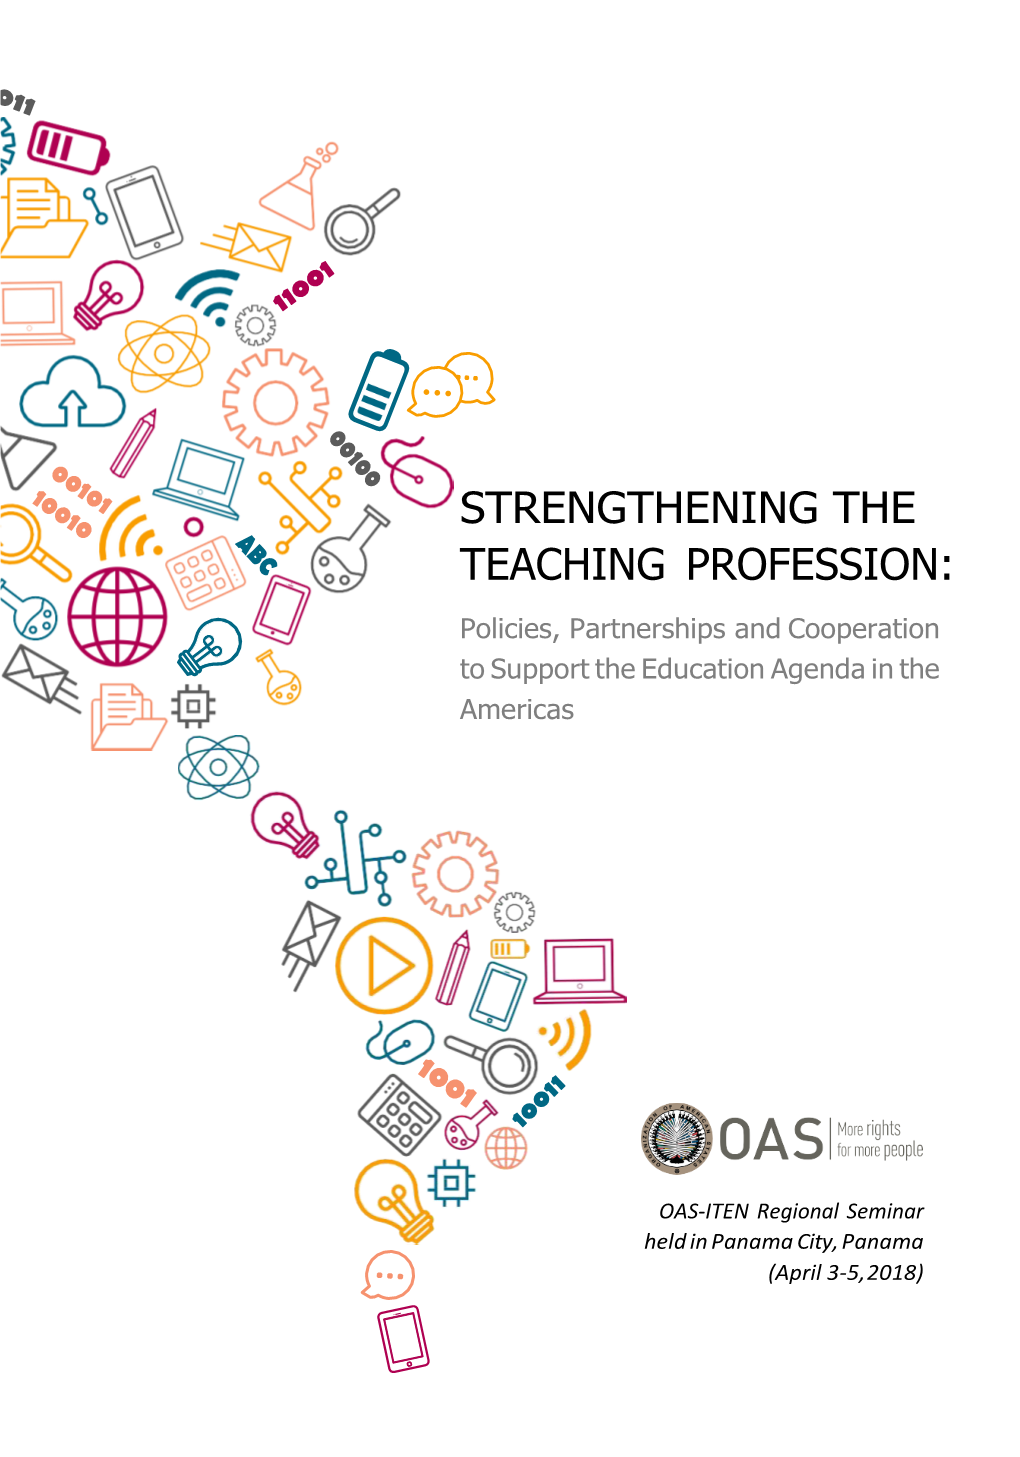 Strengthening the Teaching Profession